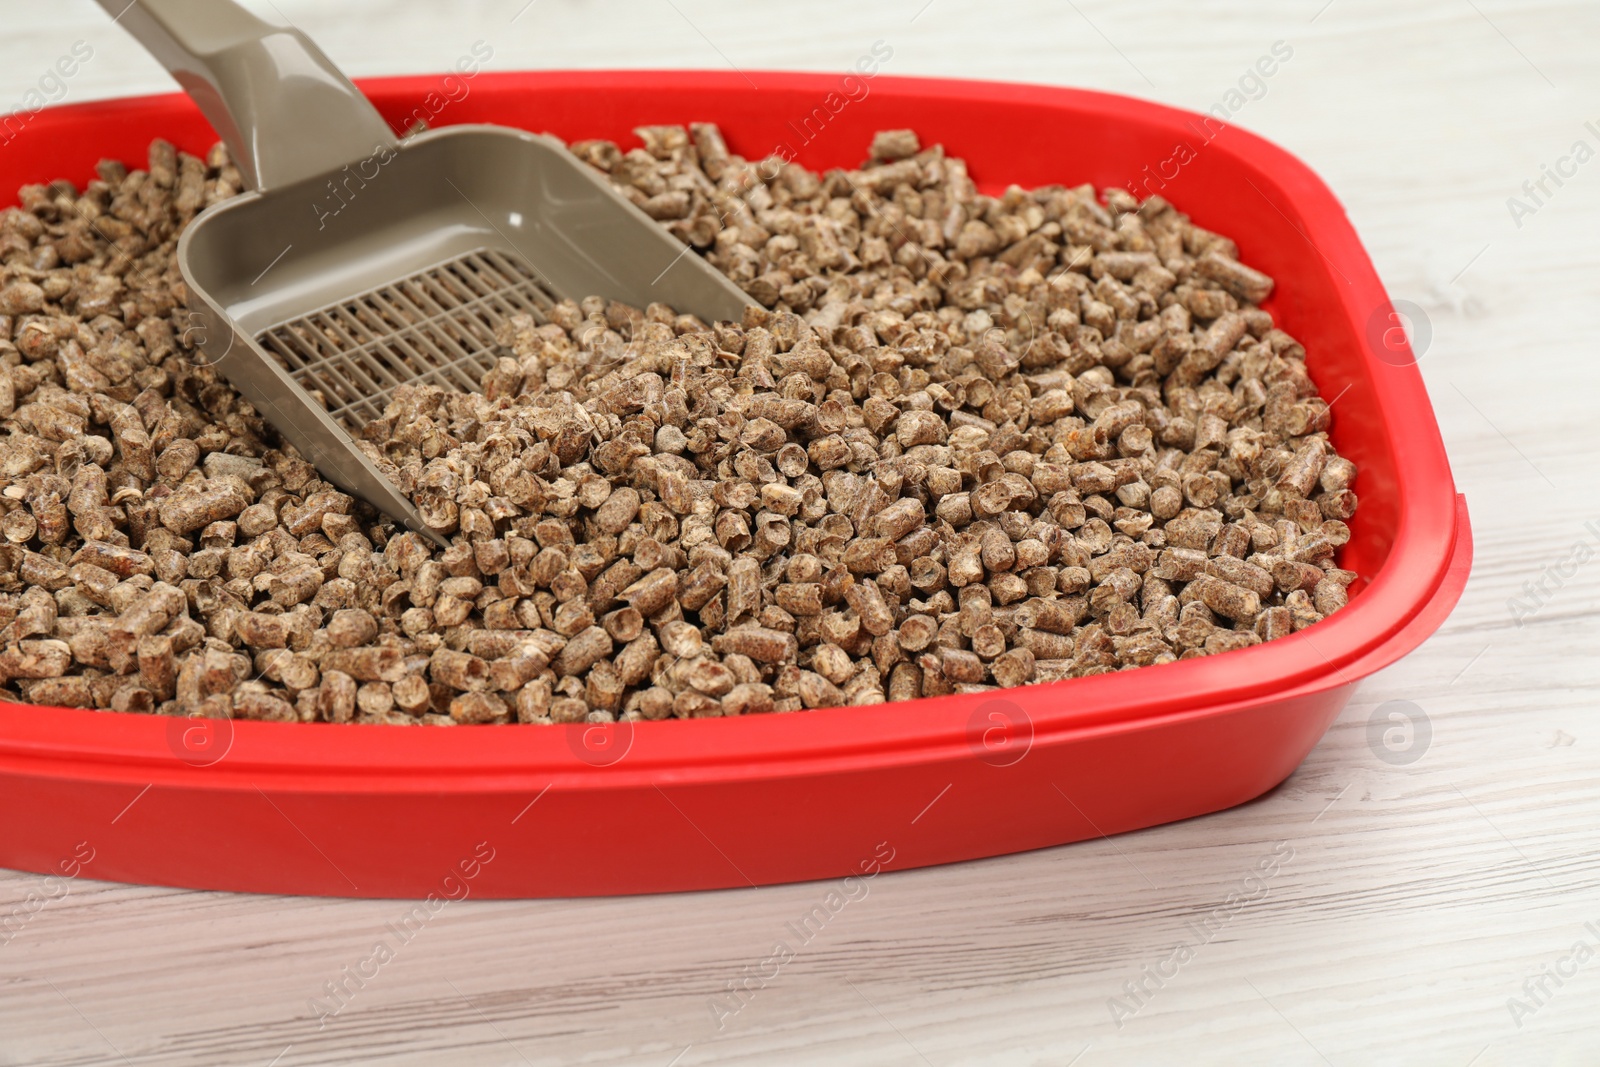 Photo of Cat litter tray with filler and scoop on white wooden floor, closeup